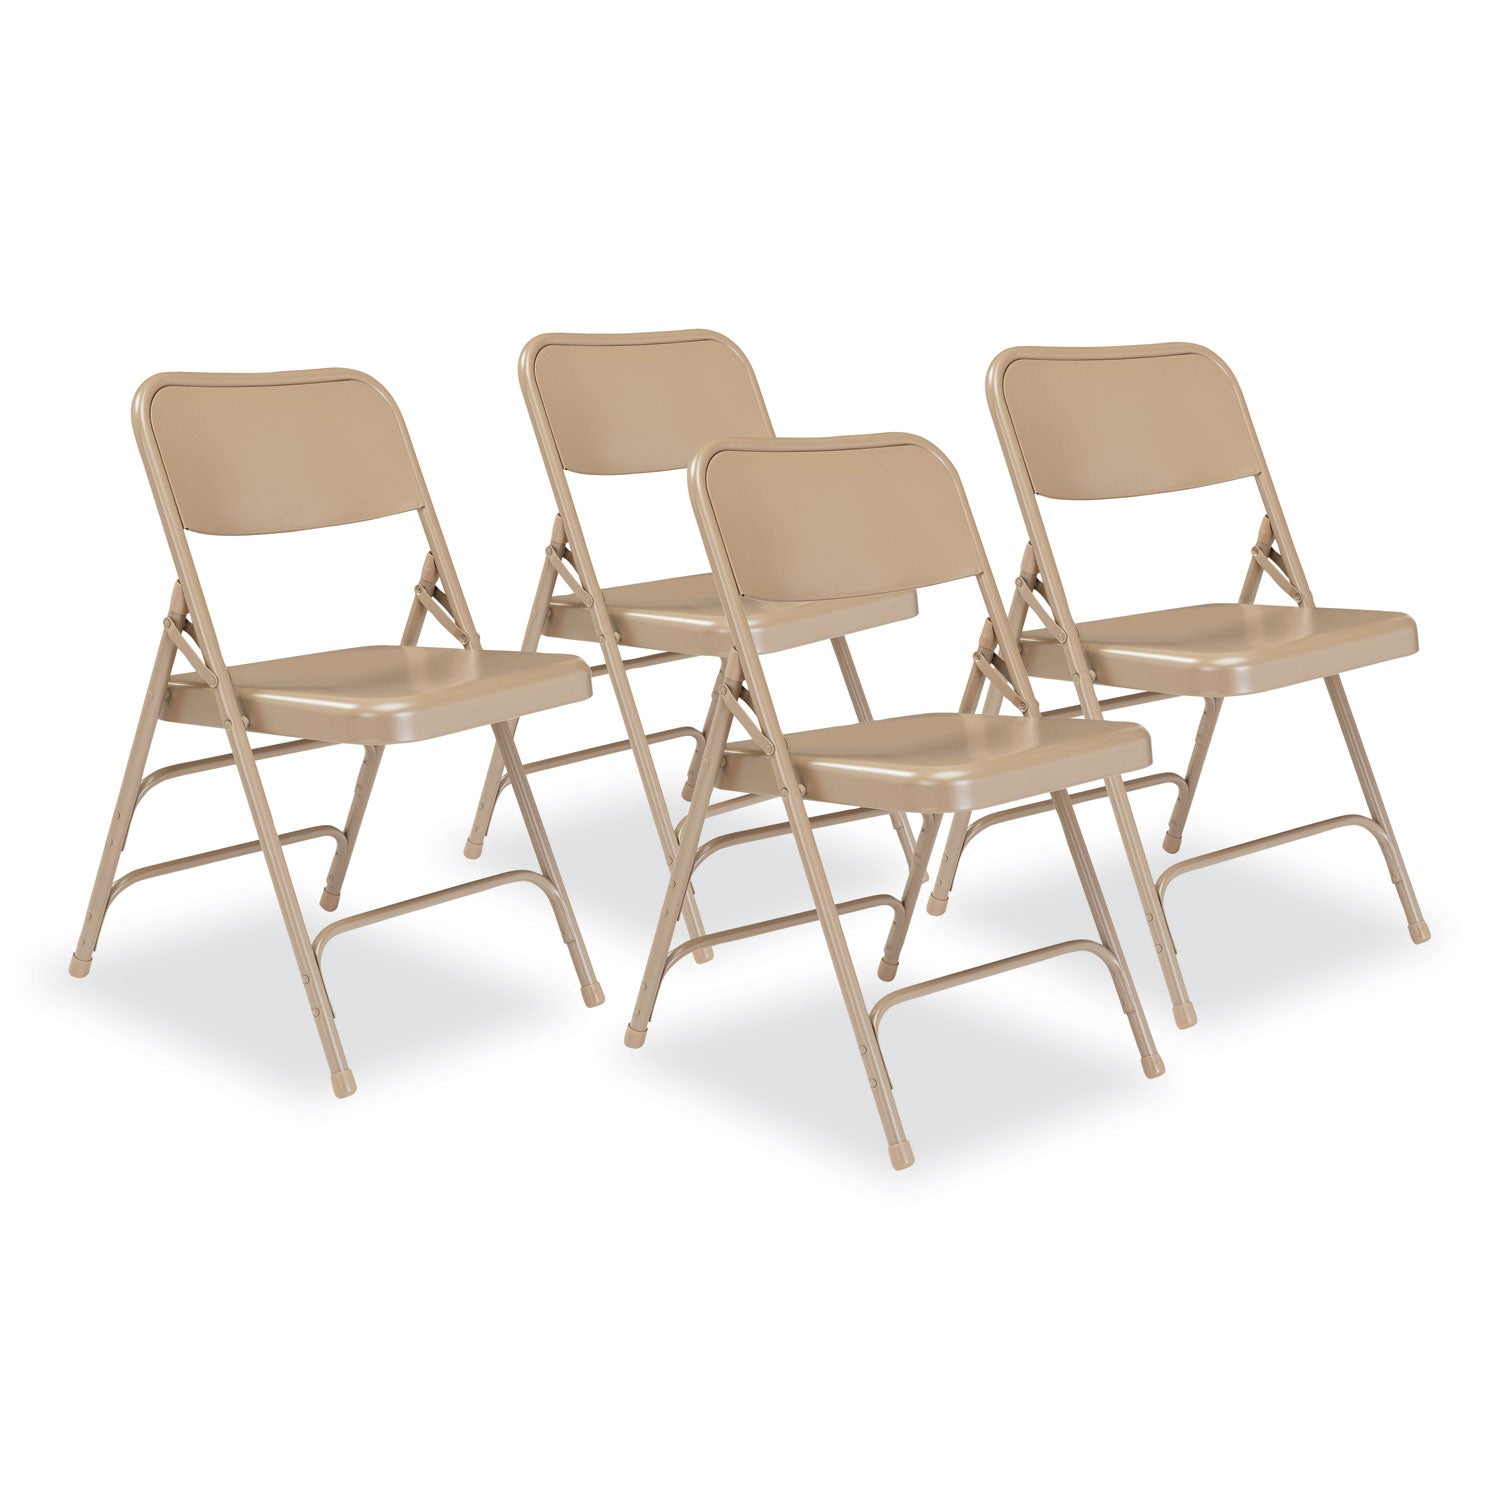 300-series-deluxe-all-steel-triple-brace-folding-chair-supports-480-lb-1725-seat-ht-beige-4-ct-ships-in-1-3-bus-days_nps301 - 1